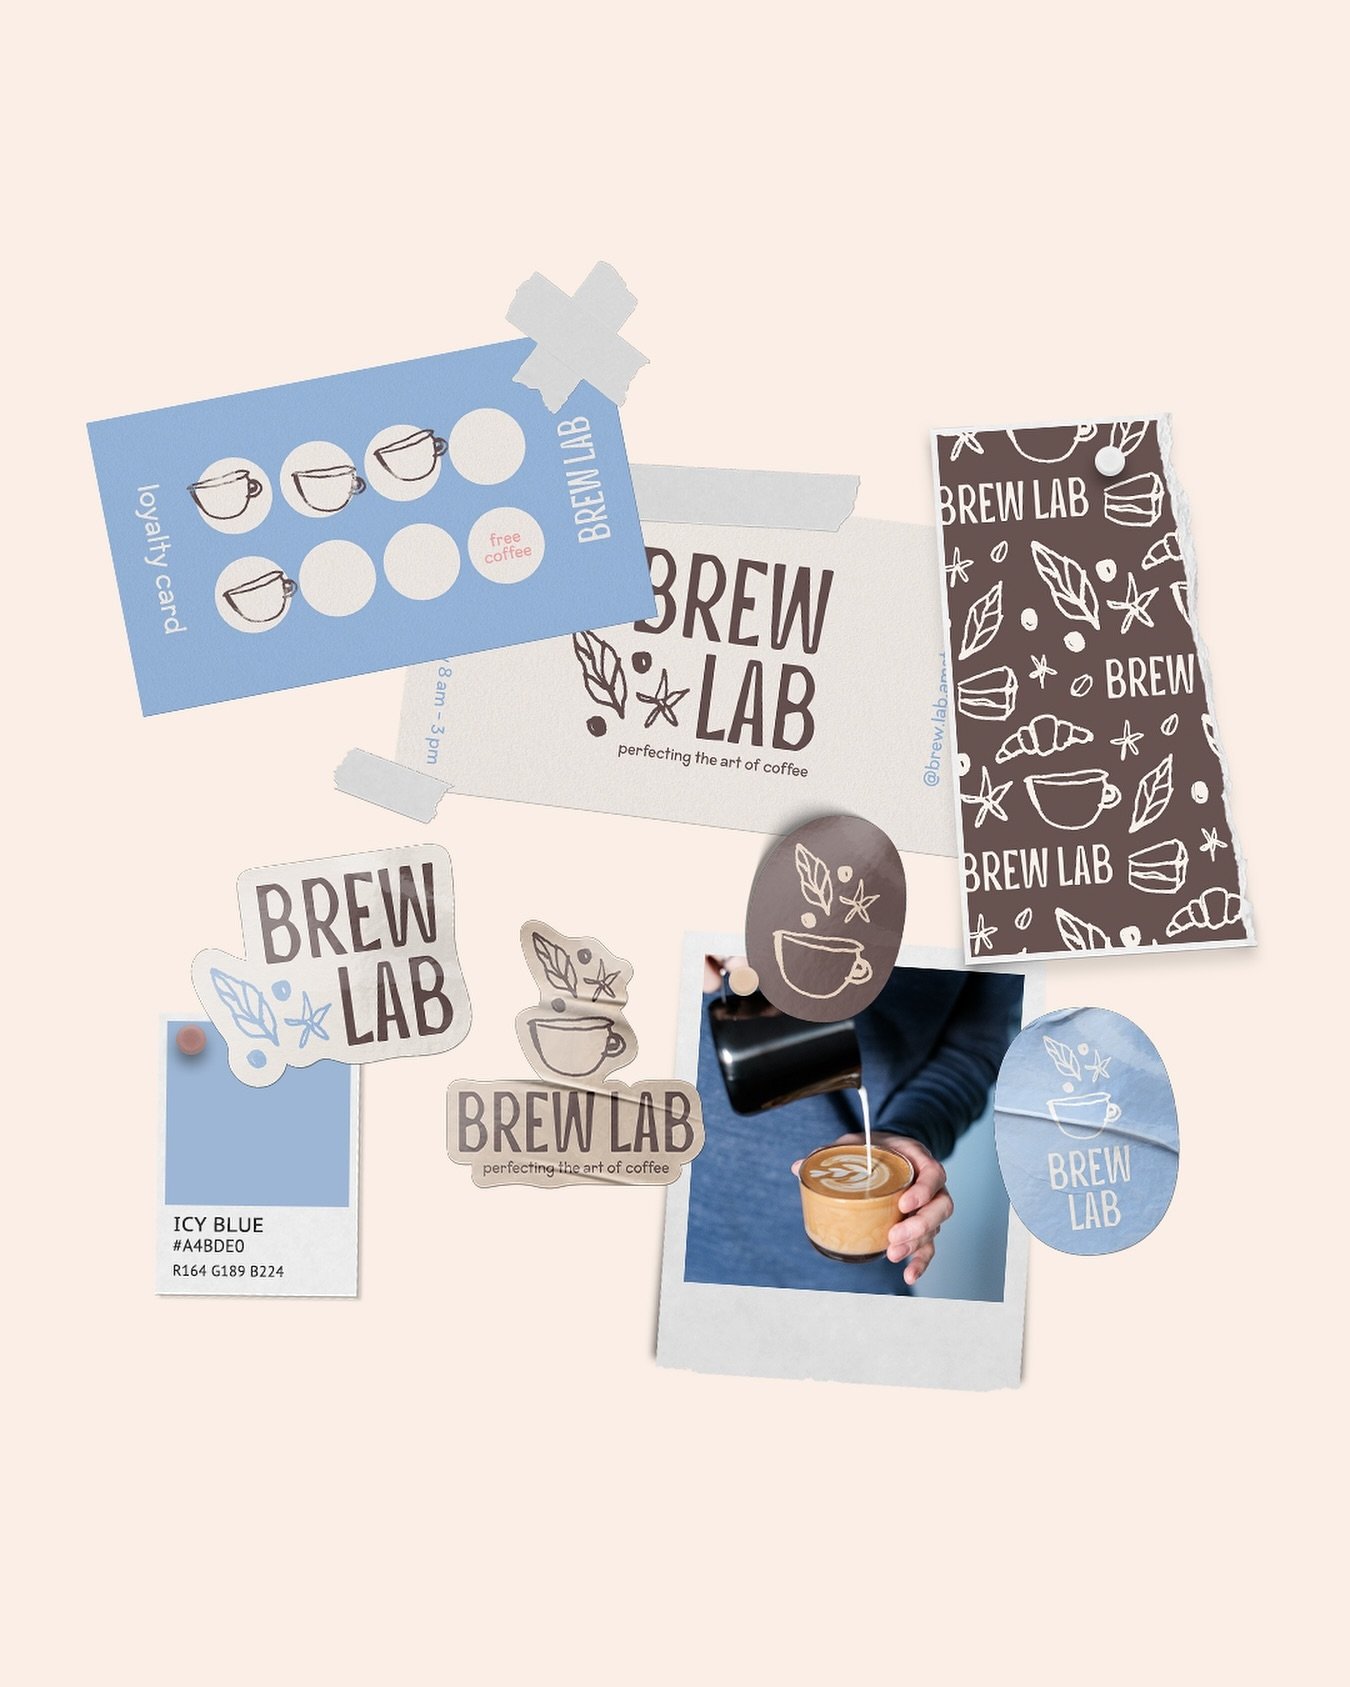 another look at some of the brand assets of brew lab ☕️🥐

love how all of these look together in a little vibe board ✨
brew lab is a cafe that focuses on the art of brewing coffee &amp; serving delicious snacks ☕️🥐

would you stop by and have a cof